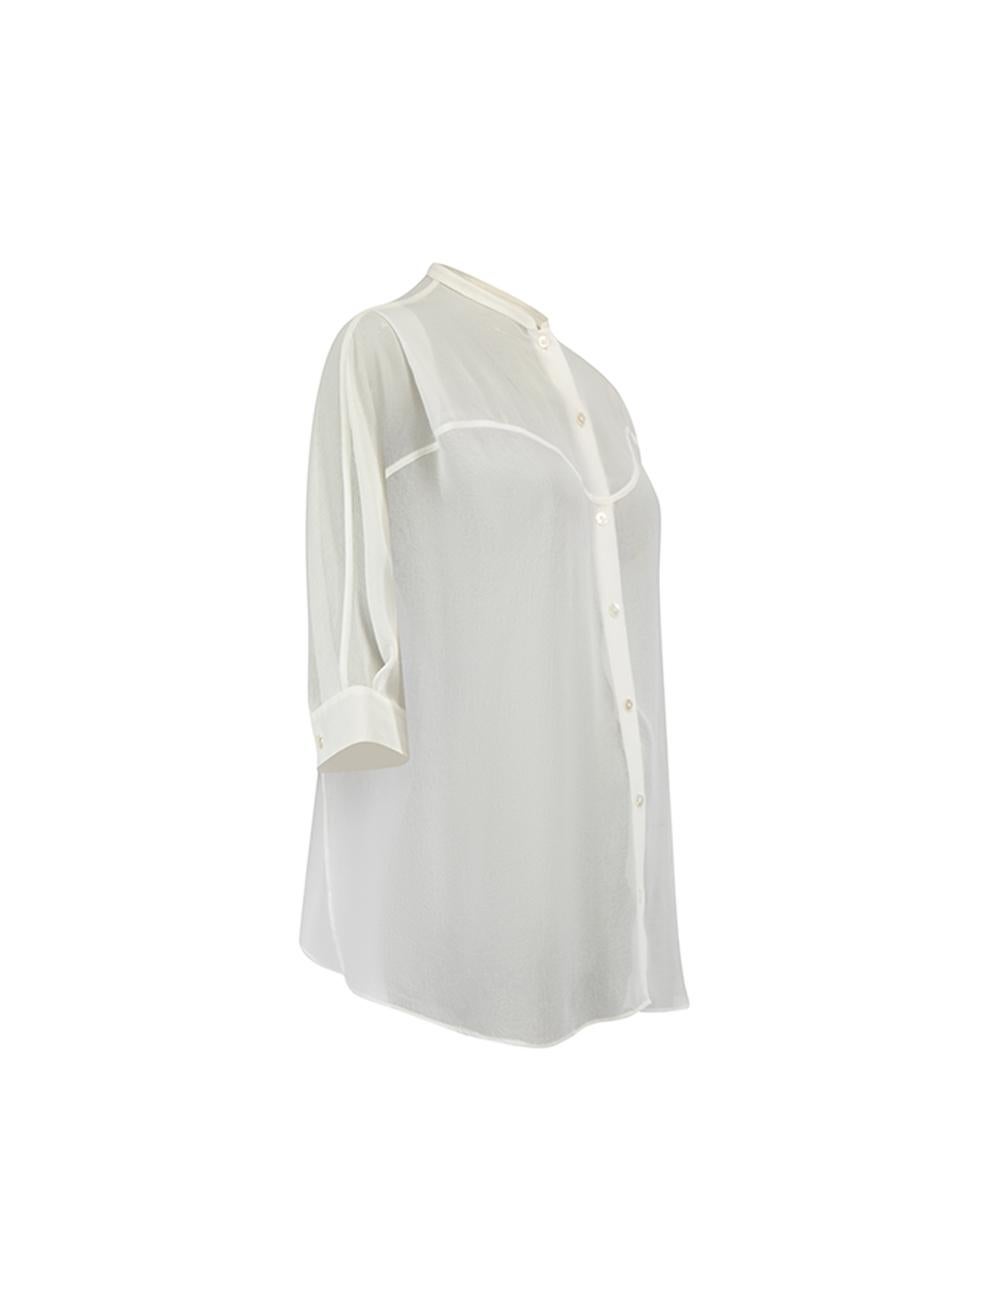 CONDITION is Very good. Minimal wear to blouse is evident. Minimal wear to exterior fabric where loose thread can be seen on this used Acne designer resale item.  Details  Cream Chiffon Blouse Front button up closure Mid sleeves Buttoned cuffs